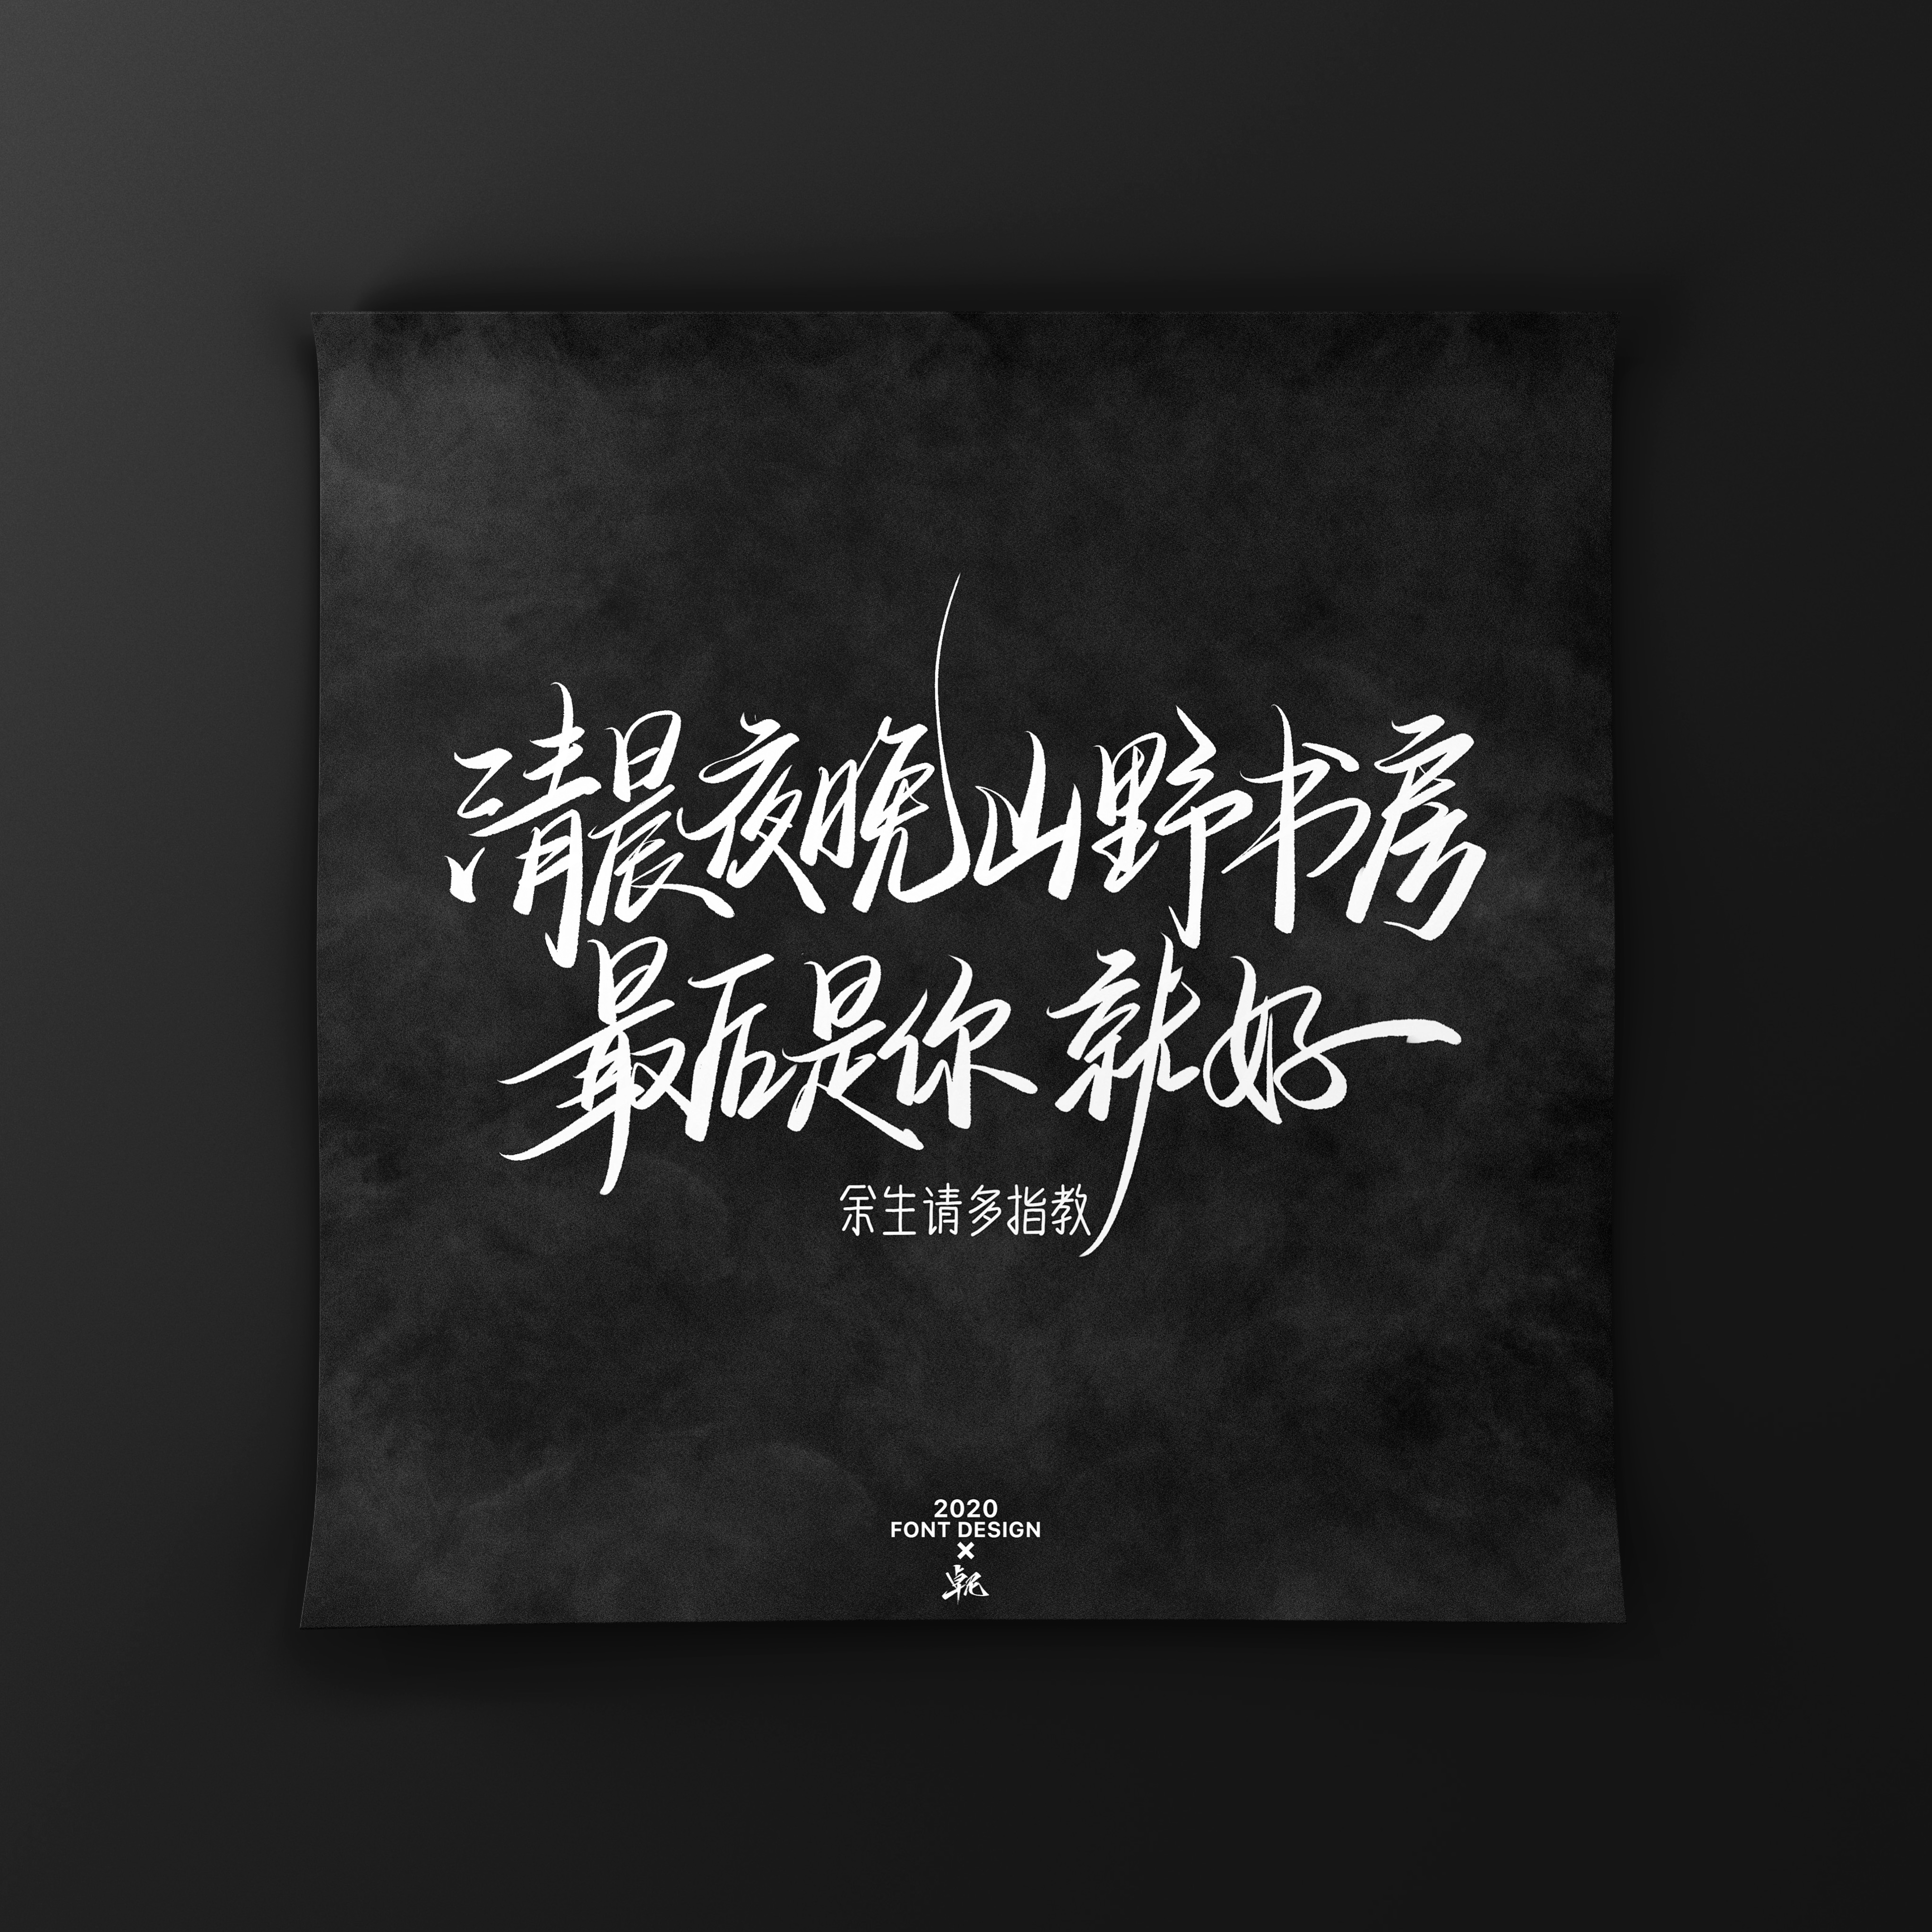 Interesting Chinese Creative Font Design-A collection of literary and artistic series